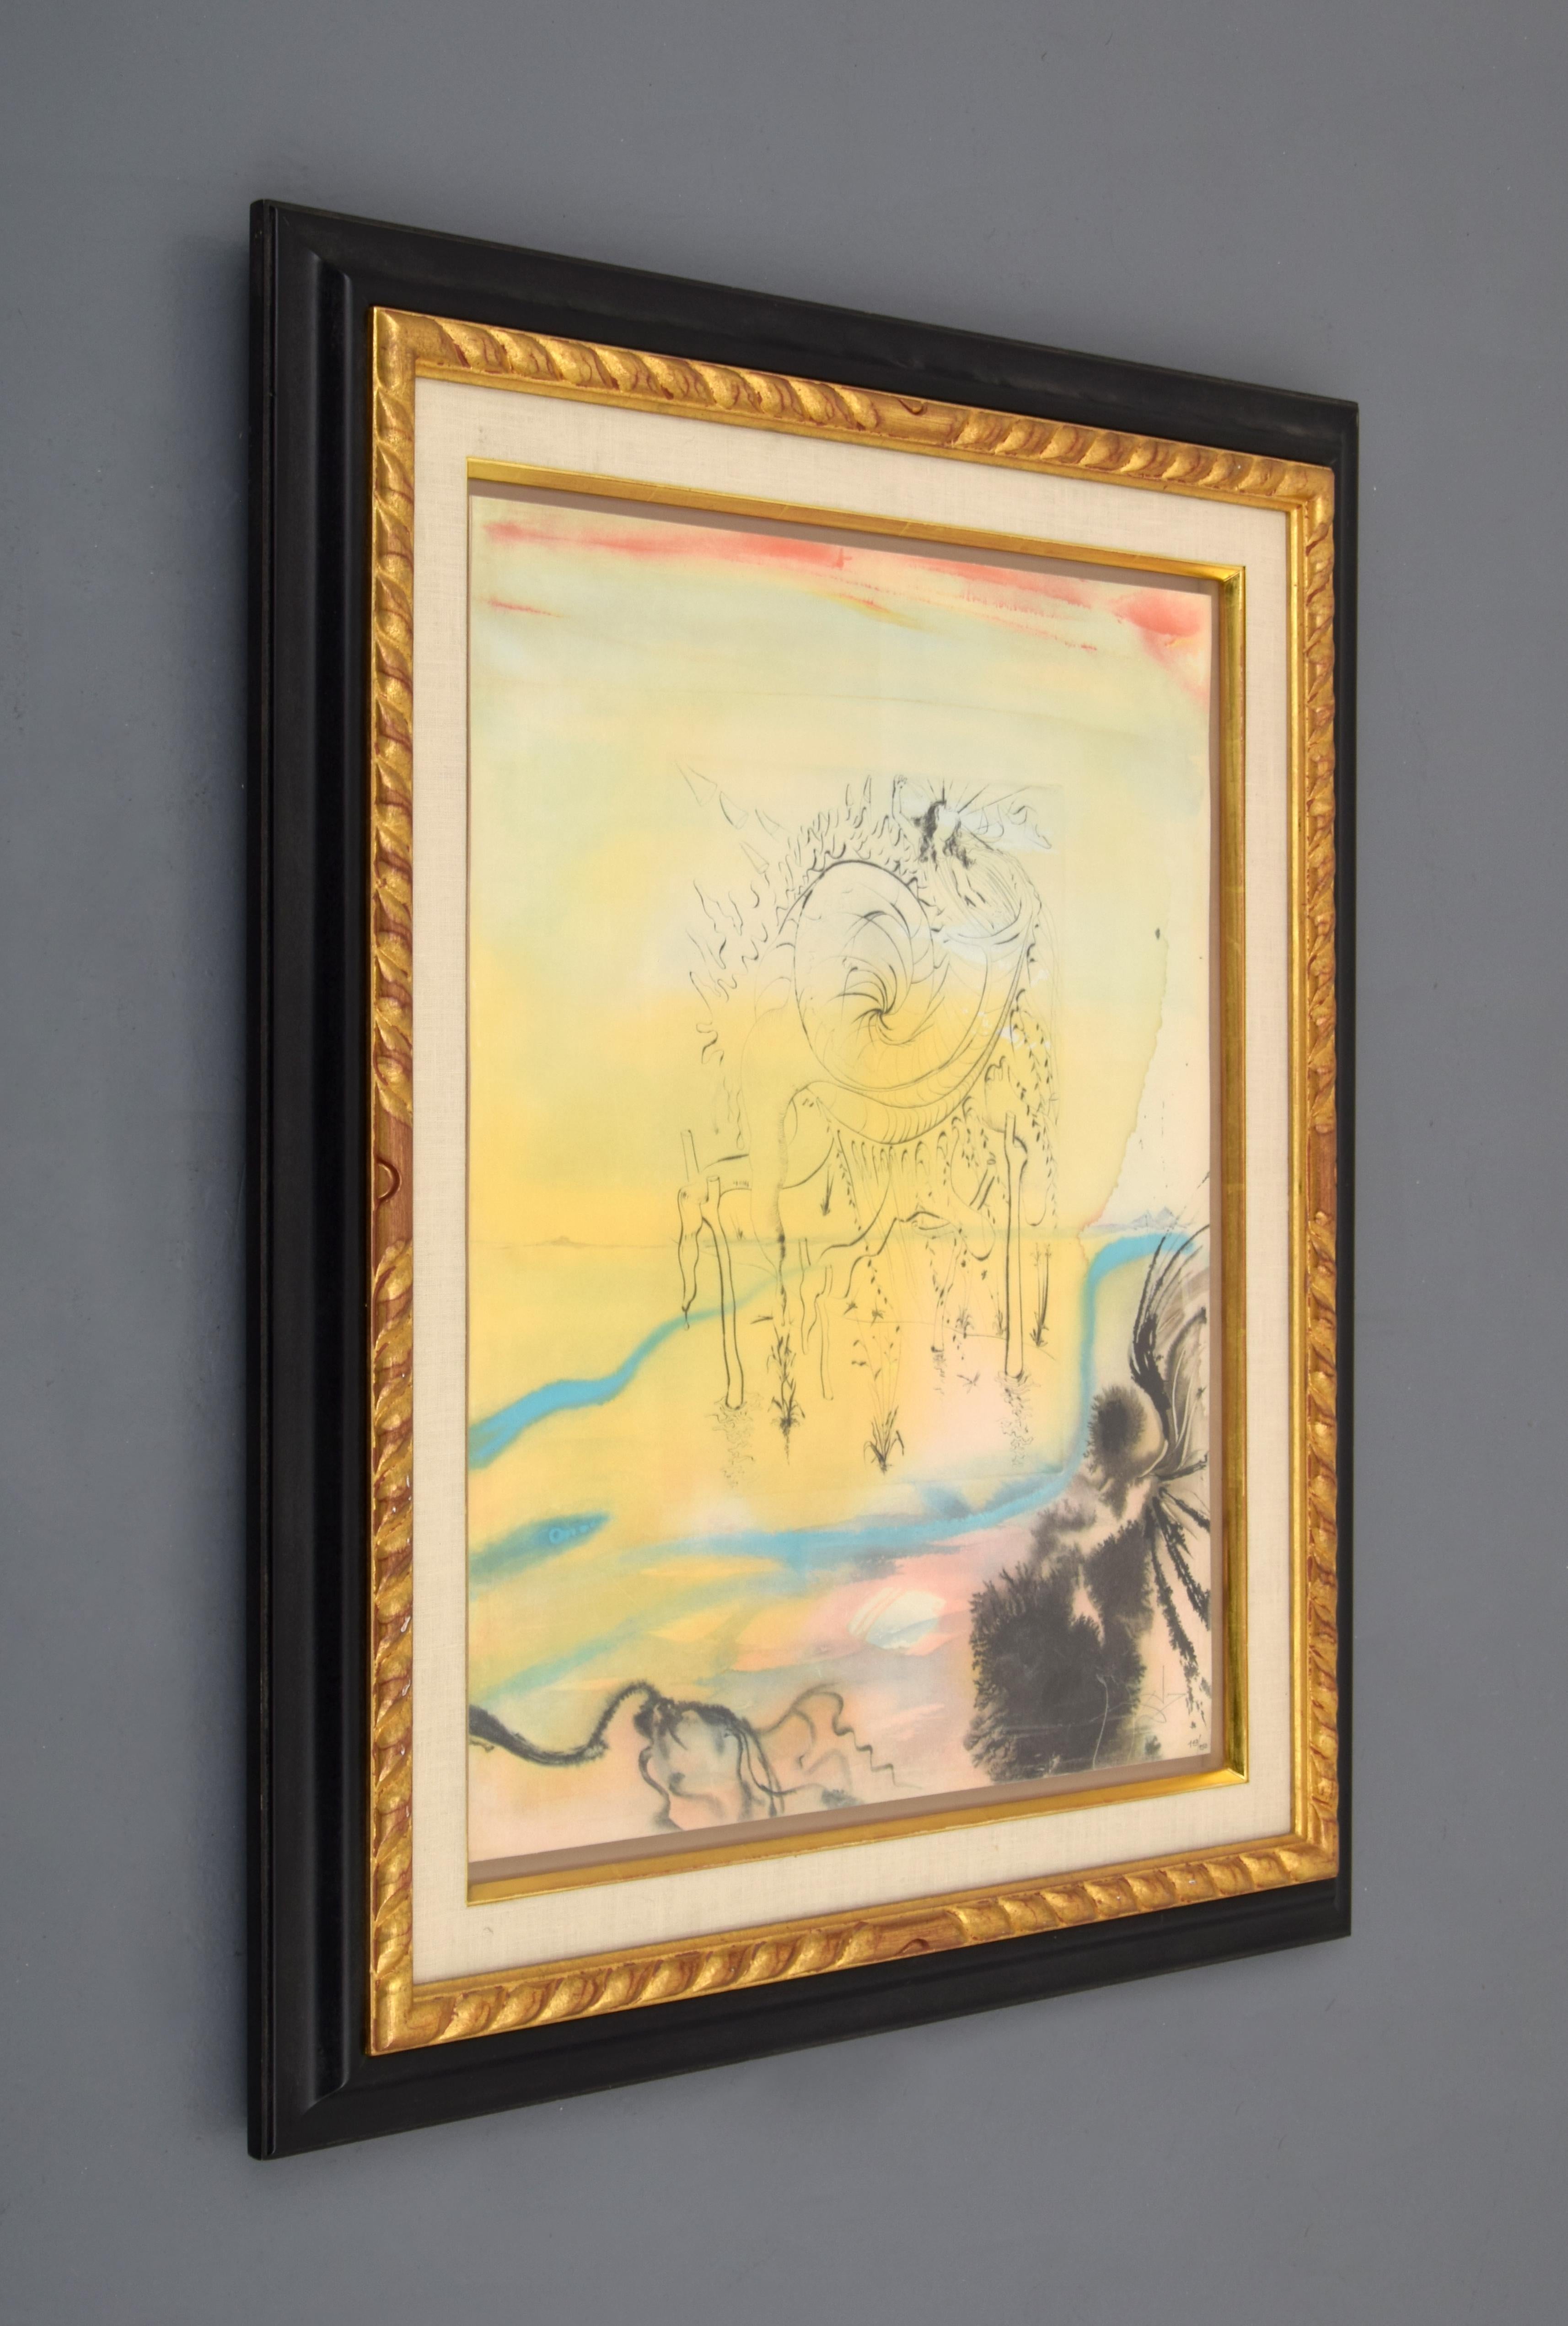 Salvador Dali “Moses Saved from the Waters” Lithograph, Signed Edition - Print by Salvador Dalí